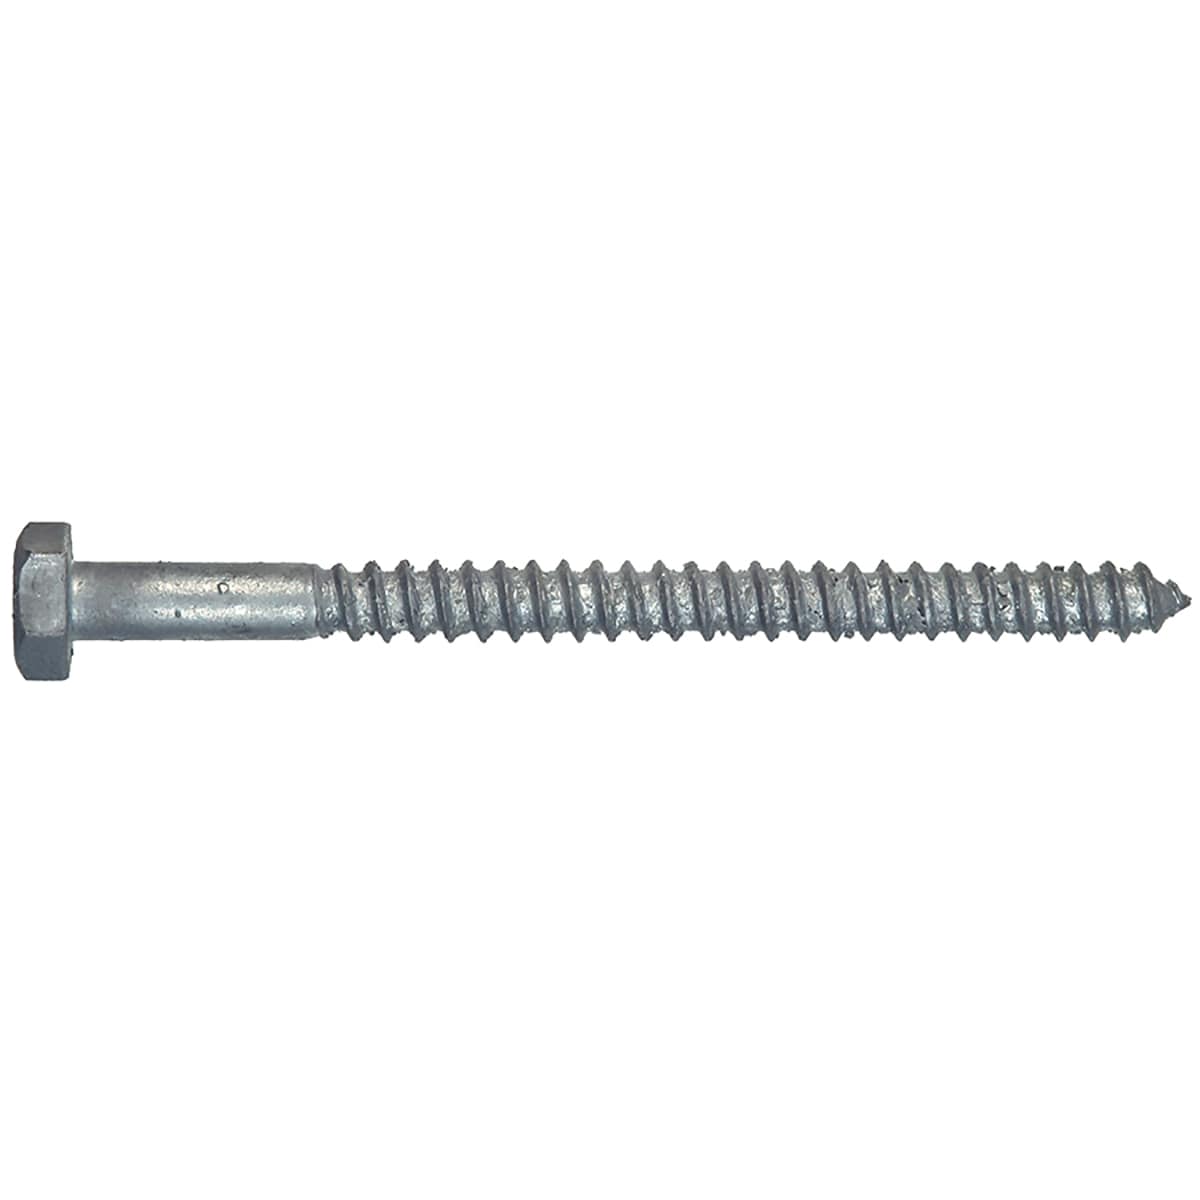 1/4 X 2-Inch 100-Pack The Hillman Group 812009 Hot Dipped Galavanized Hex Lag Screw